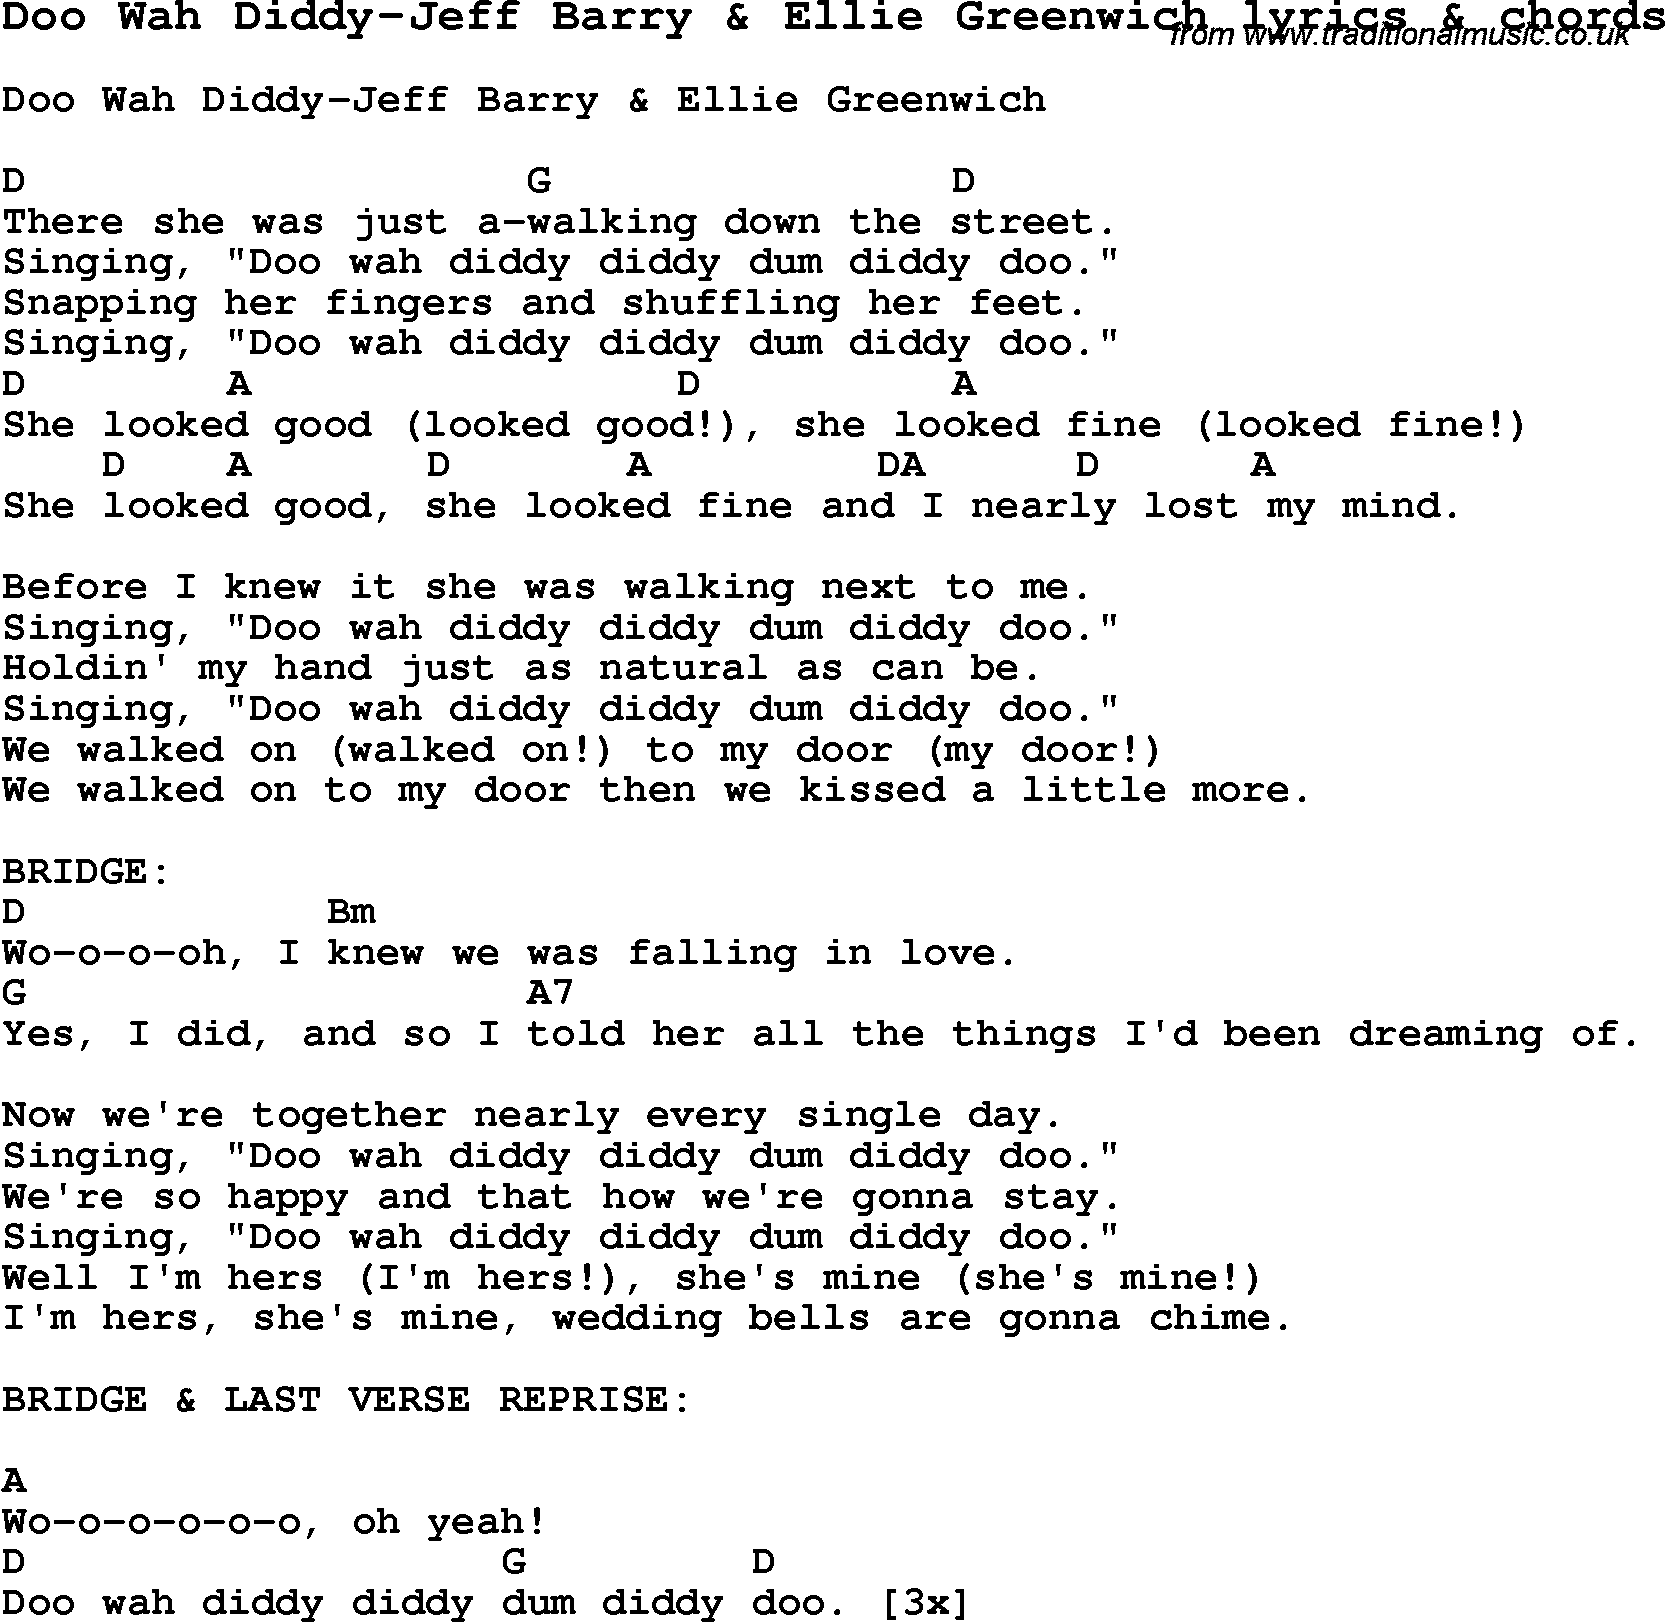 Love Song Lyrics for: Doo Wah Diddy-Jeff Barry & Ellie Greenwich with chords for Ukulele, Guitar Banjo etc.